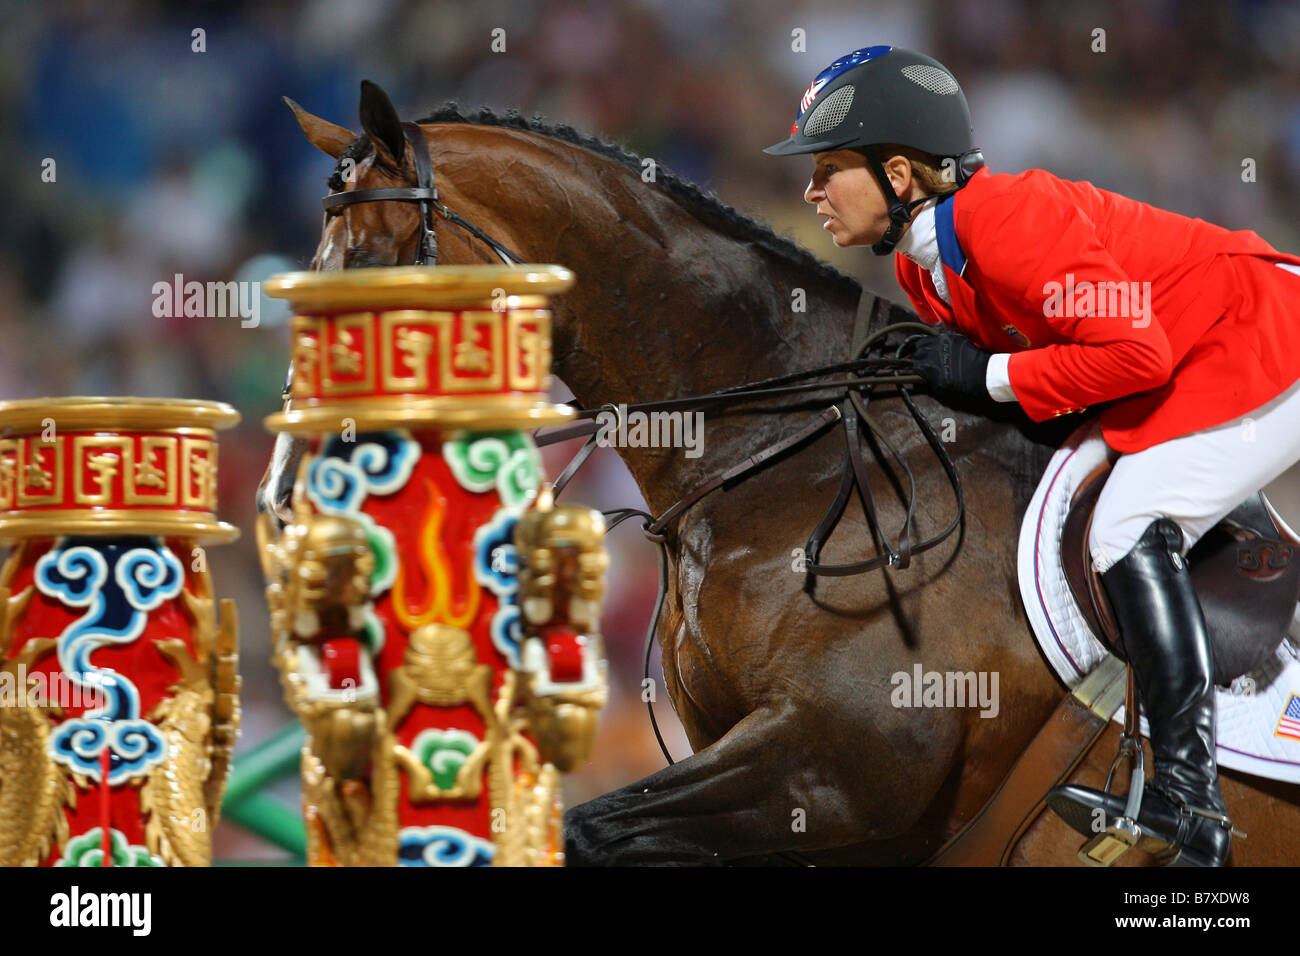 Beezie Madden USA August 18 2008 Equestrian during the Beijing 2008 Summer Olympic Games Show Jumping Competition at Shatin in Hong Kong China Photo by Yusuke Nakanishi AFLO SPORT 1090 Stock Photo